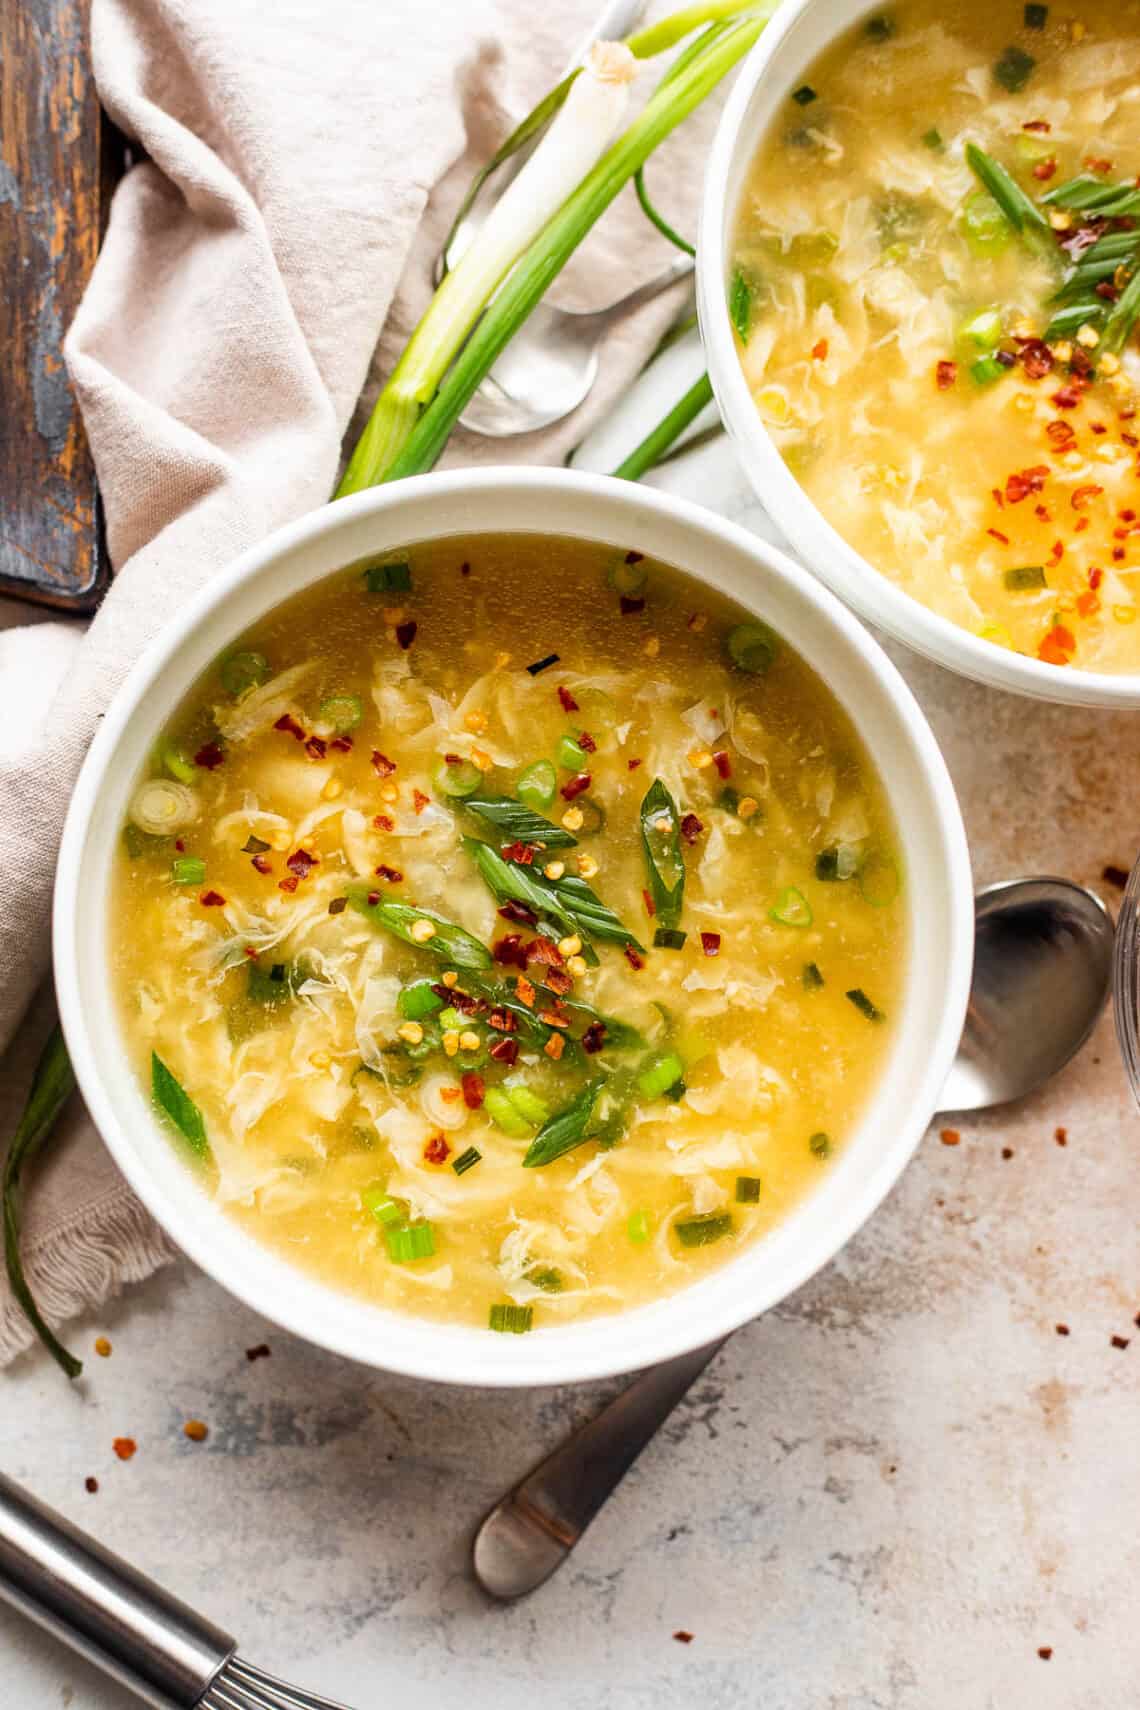 Easy Egg Drop Soup Recipe How to Make The Best Egg Drop Soup